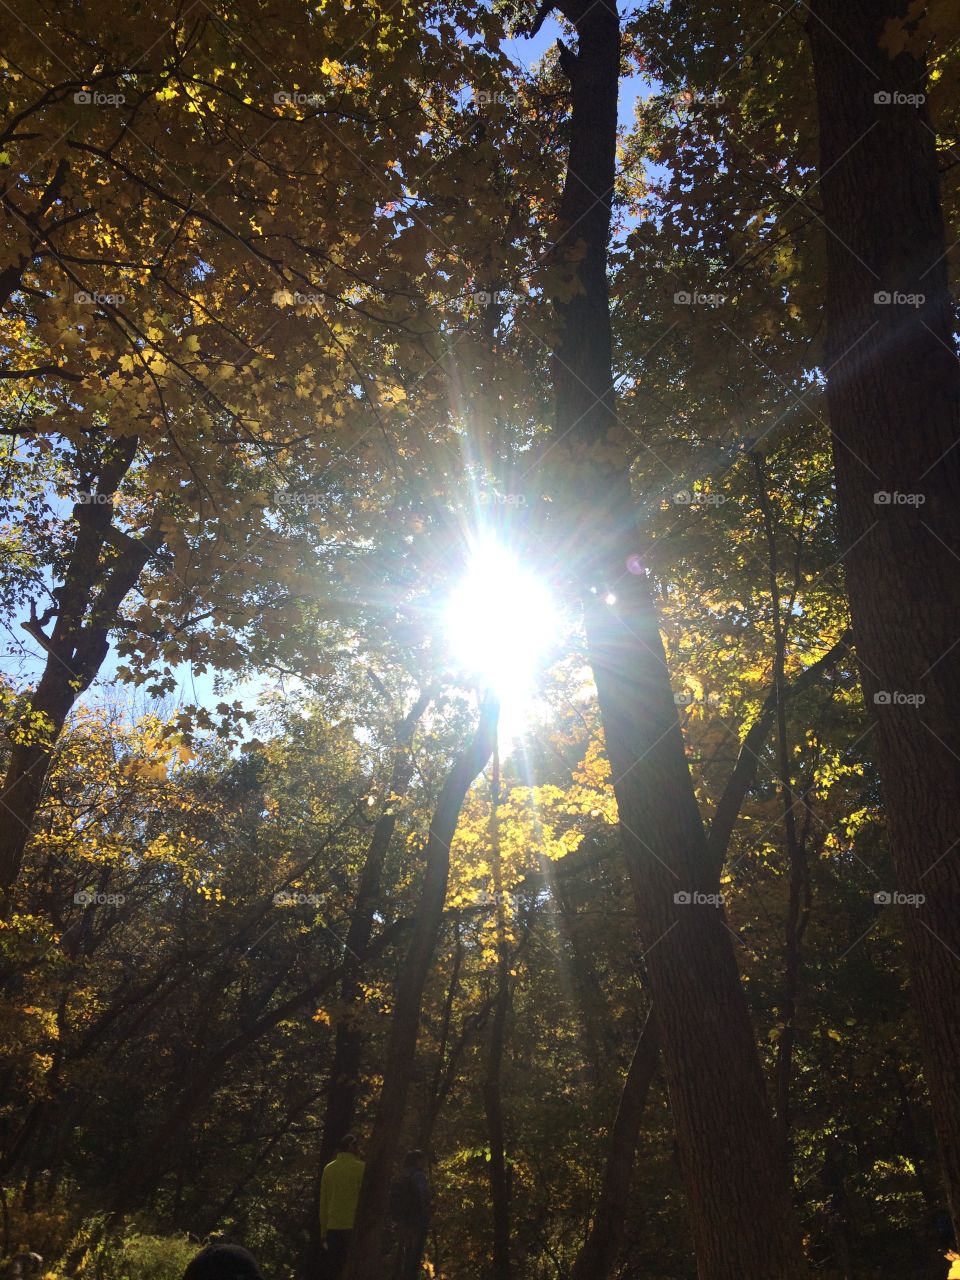 It was a beautiful autumn day at Starved Rock Park, IL.   